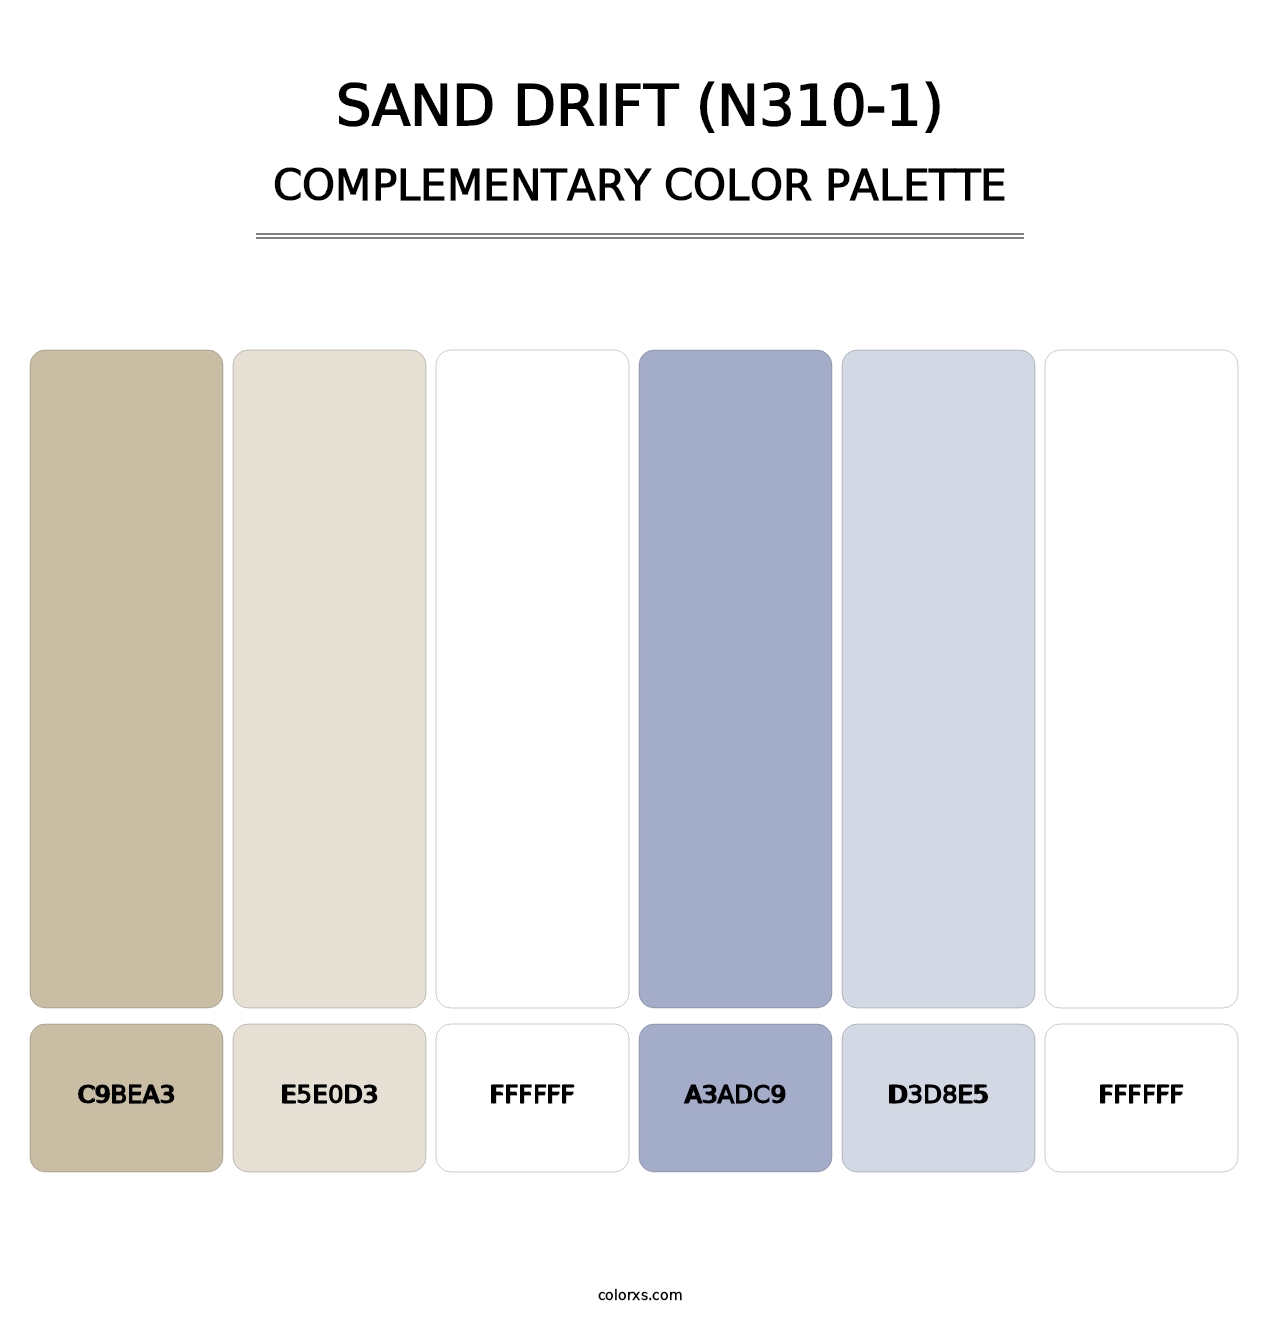 Sand Drift (N310-1) - Complementary Color Palette